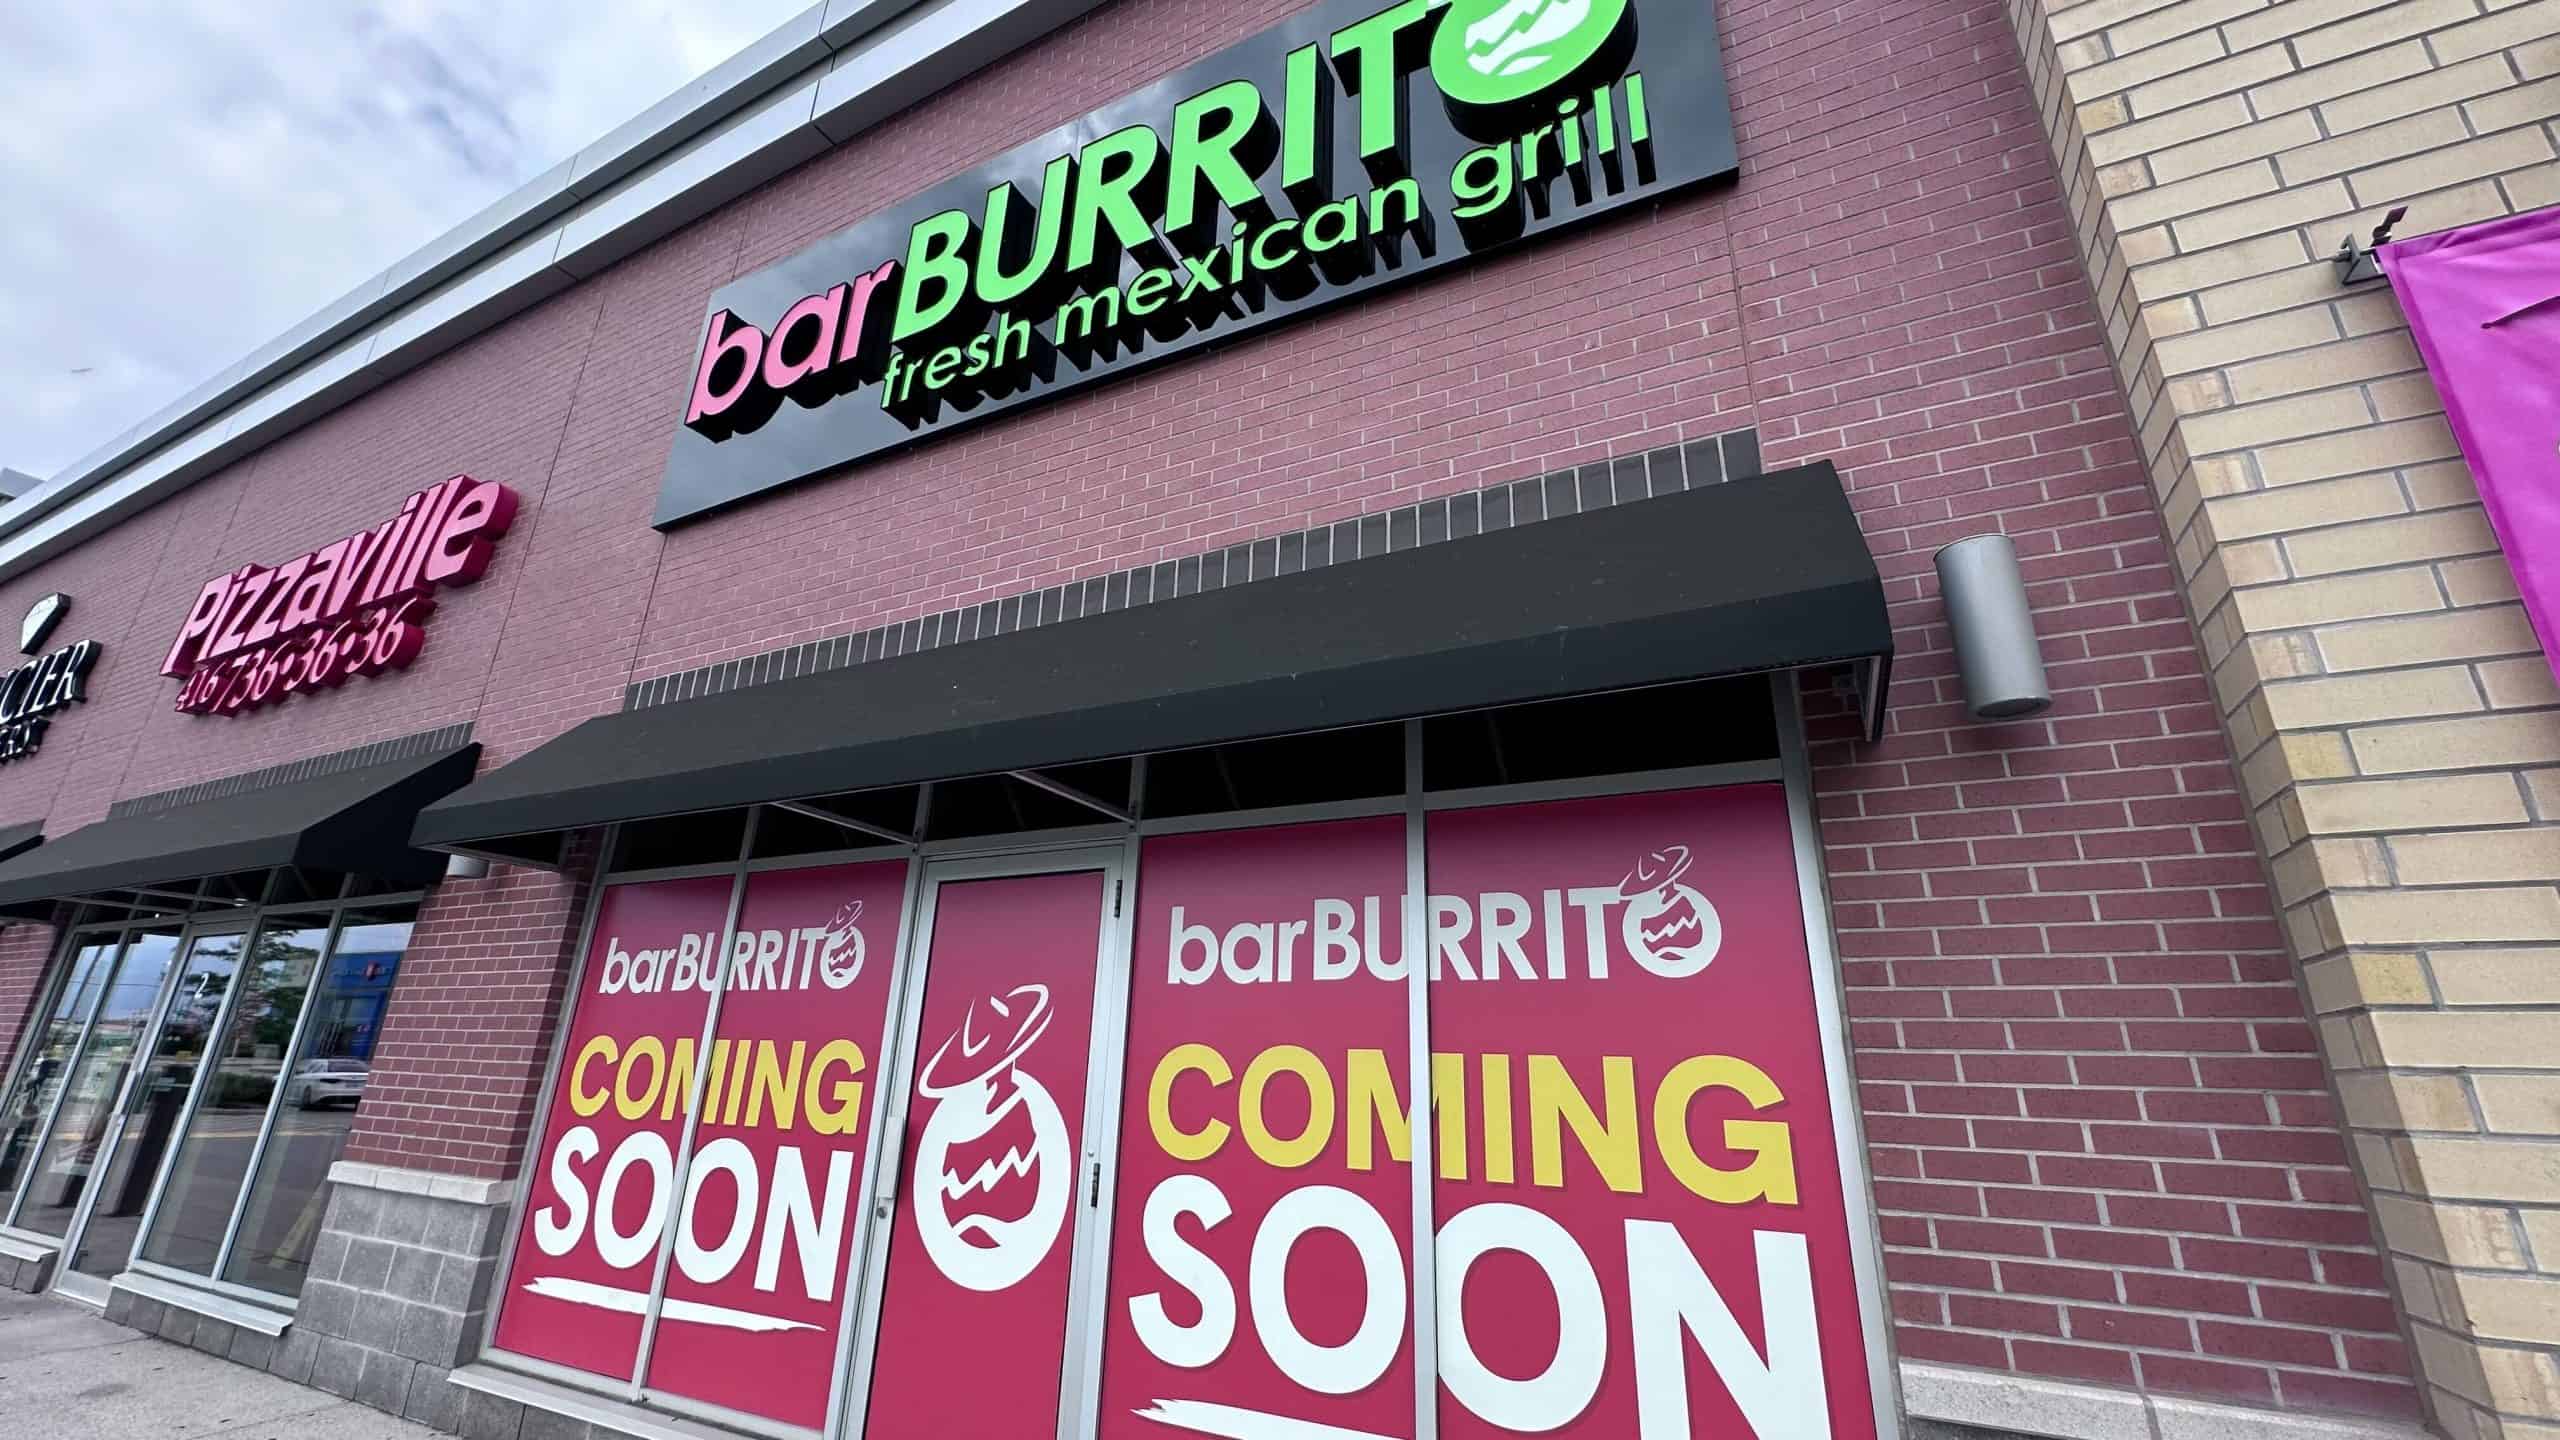 A well-known Tex-Mex chain with over 450 locations across Canada is opening another restaurant in Milton, adding to the existing locations in the area.